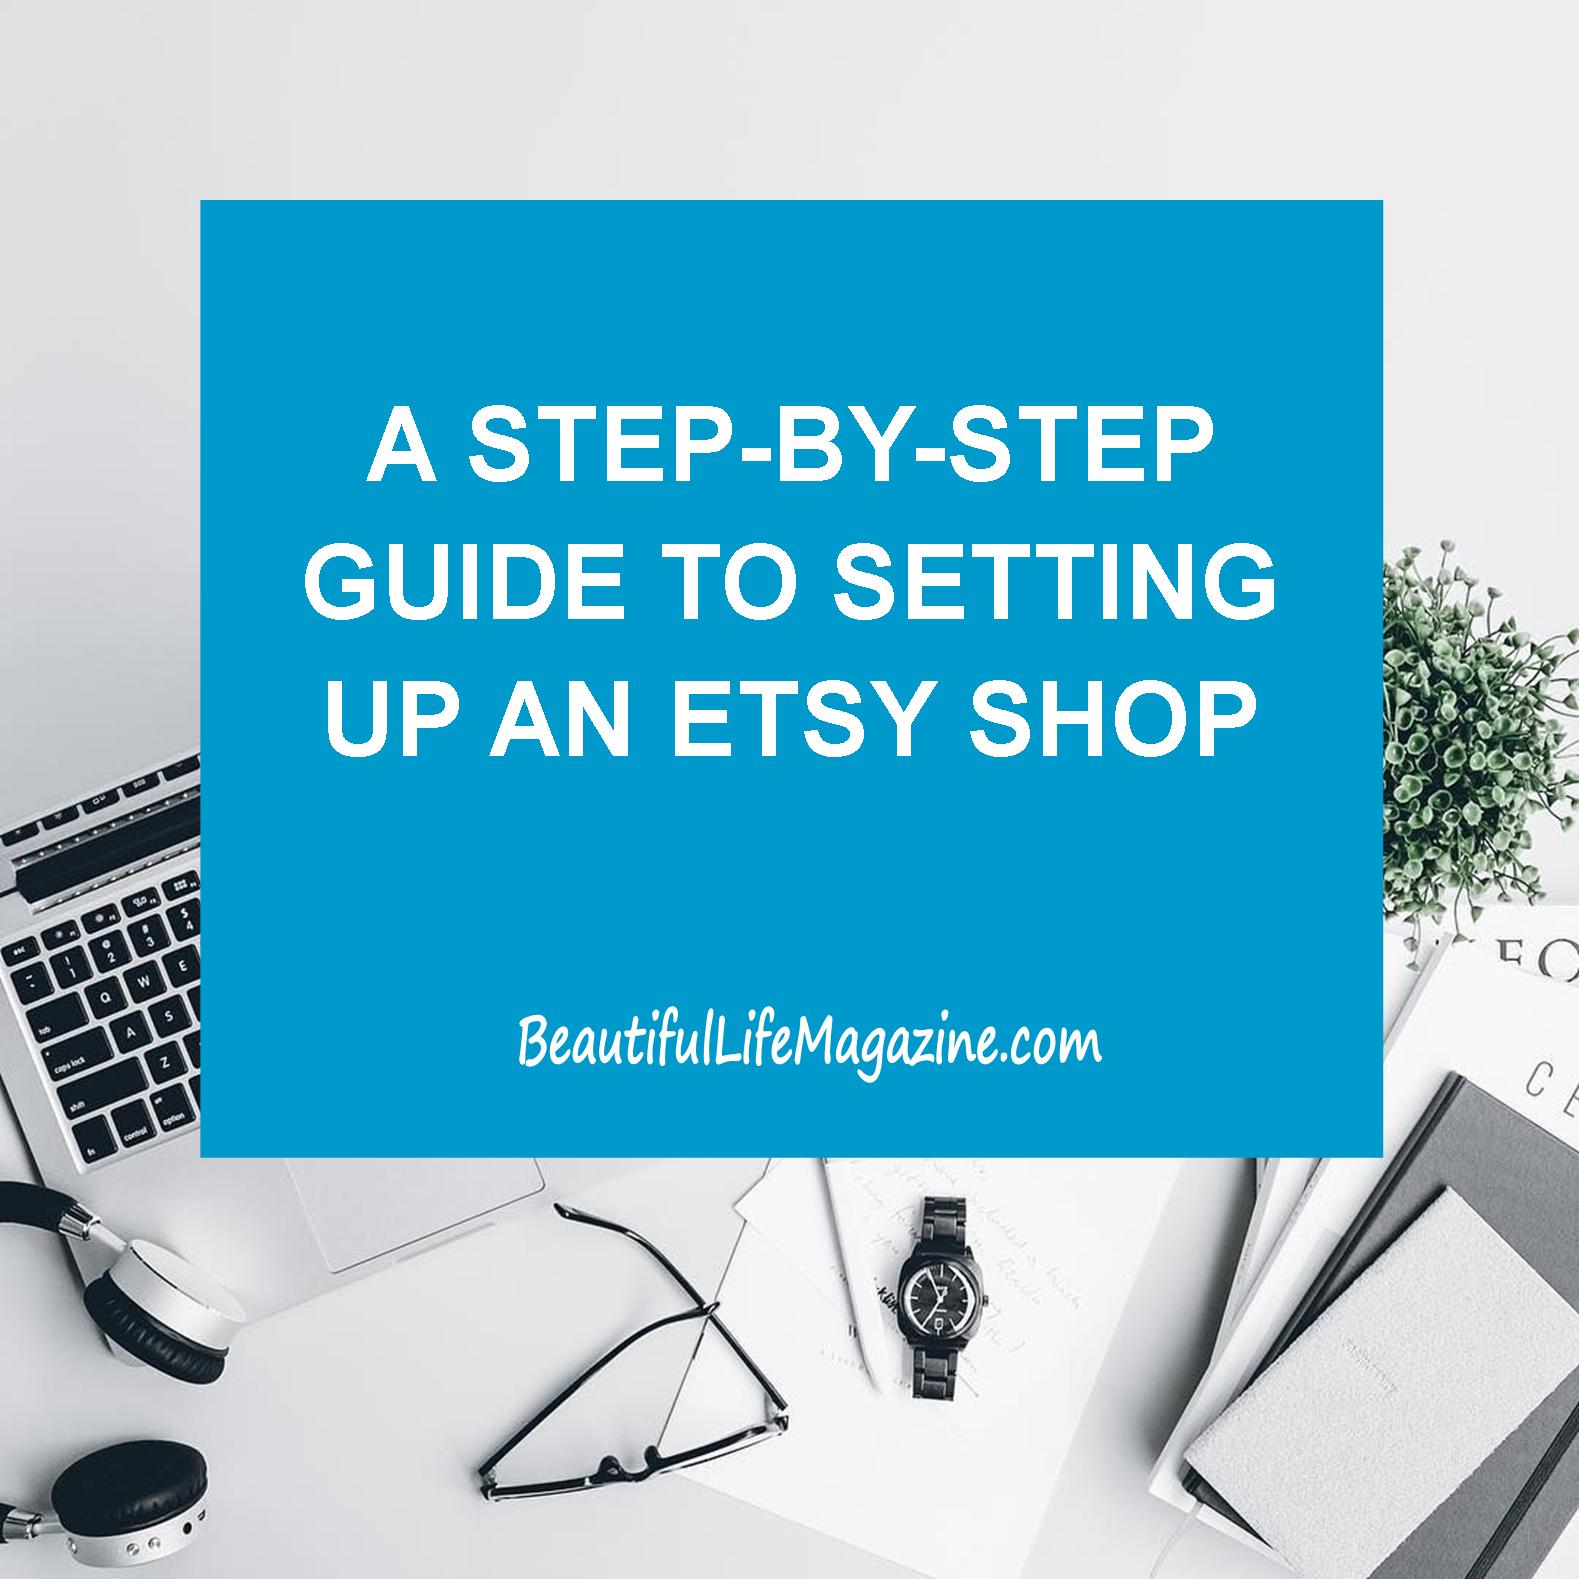 When I starting on Etsy, I feel it would have been useful to follow a process. So today I am delving deep into setting up an Etsy shop, the fuss-free way!